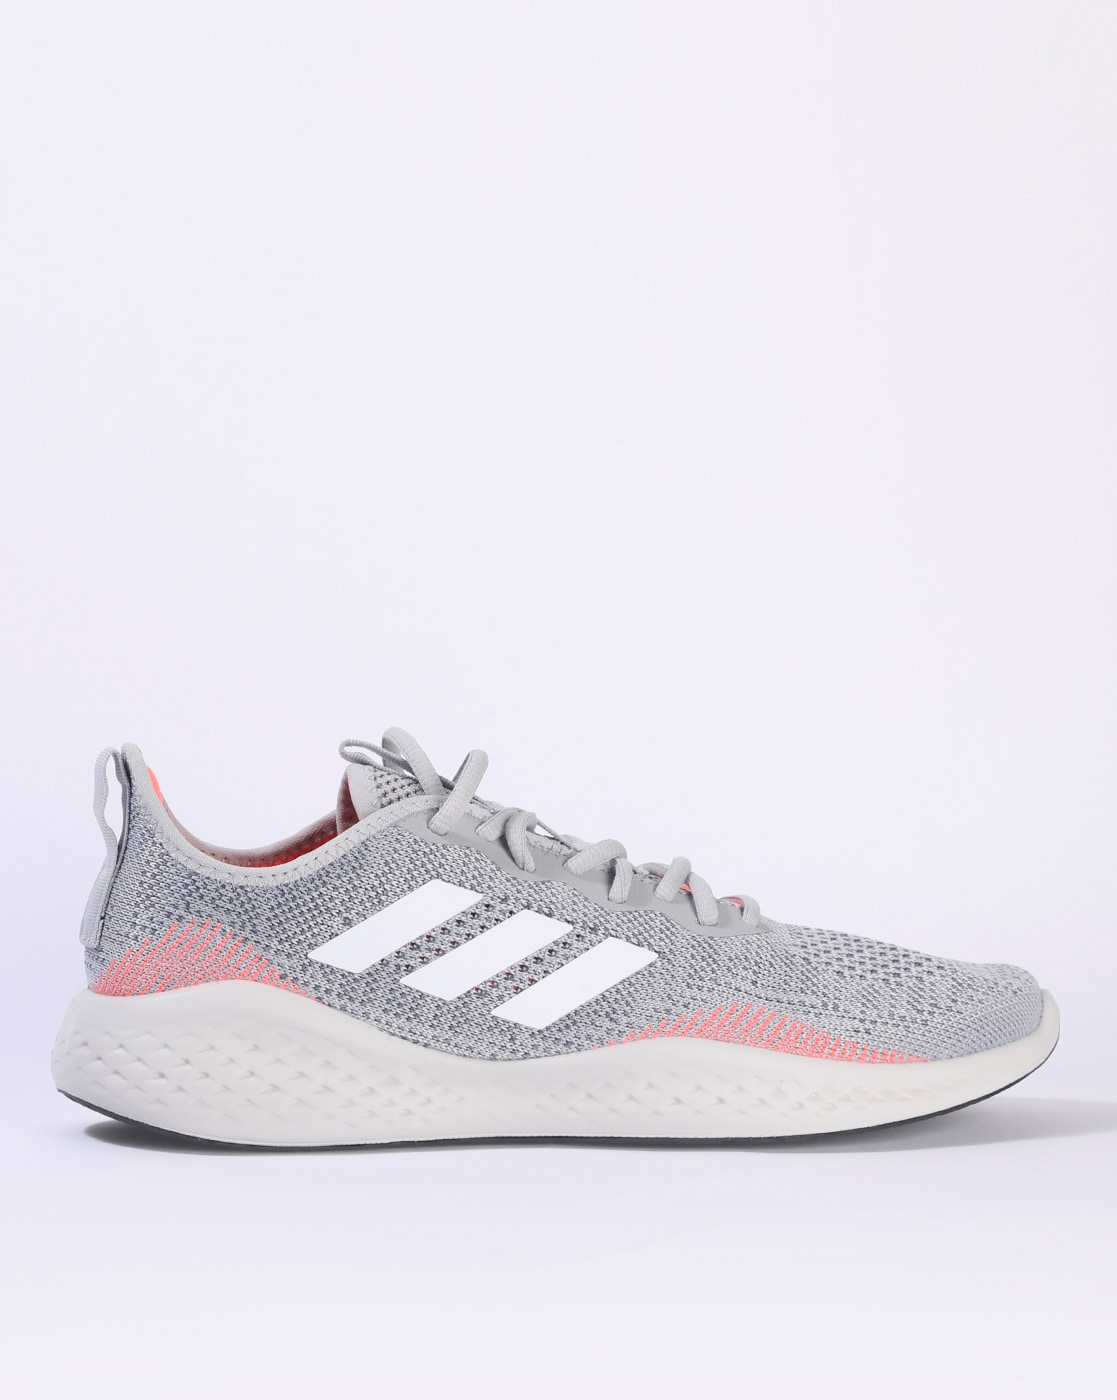 where can i return my adidas online order